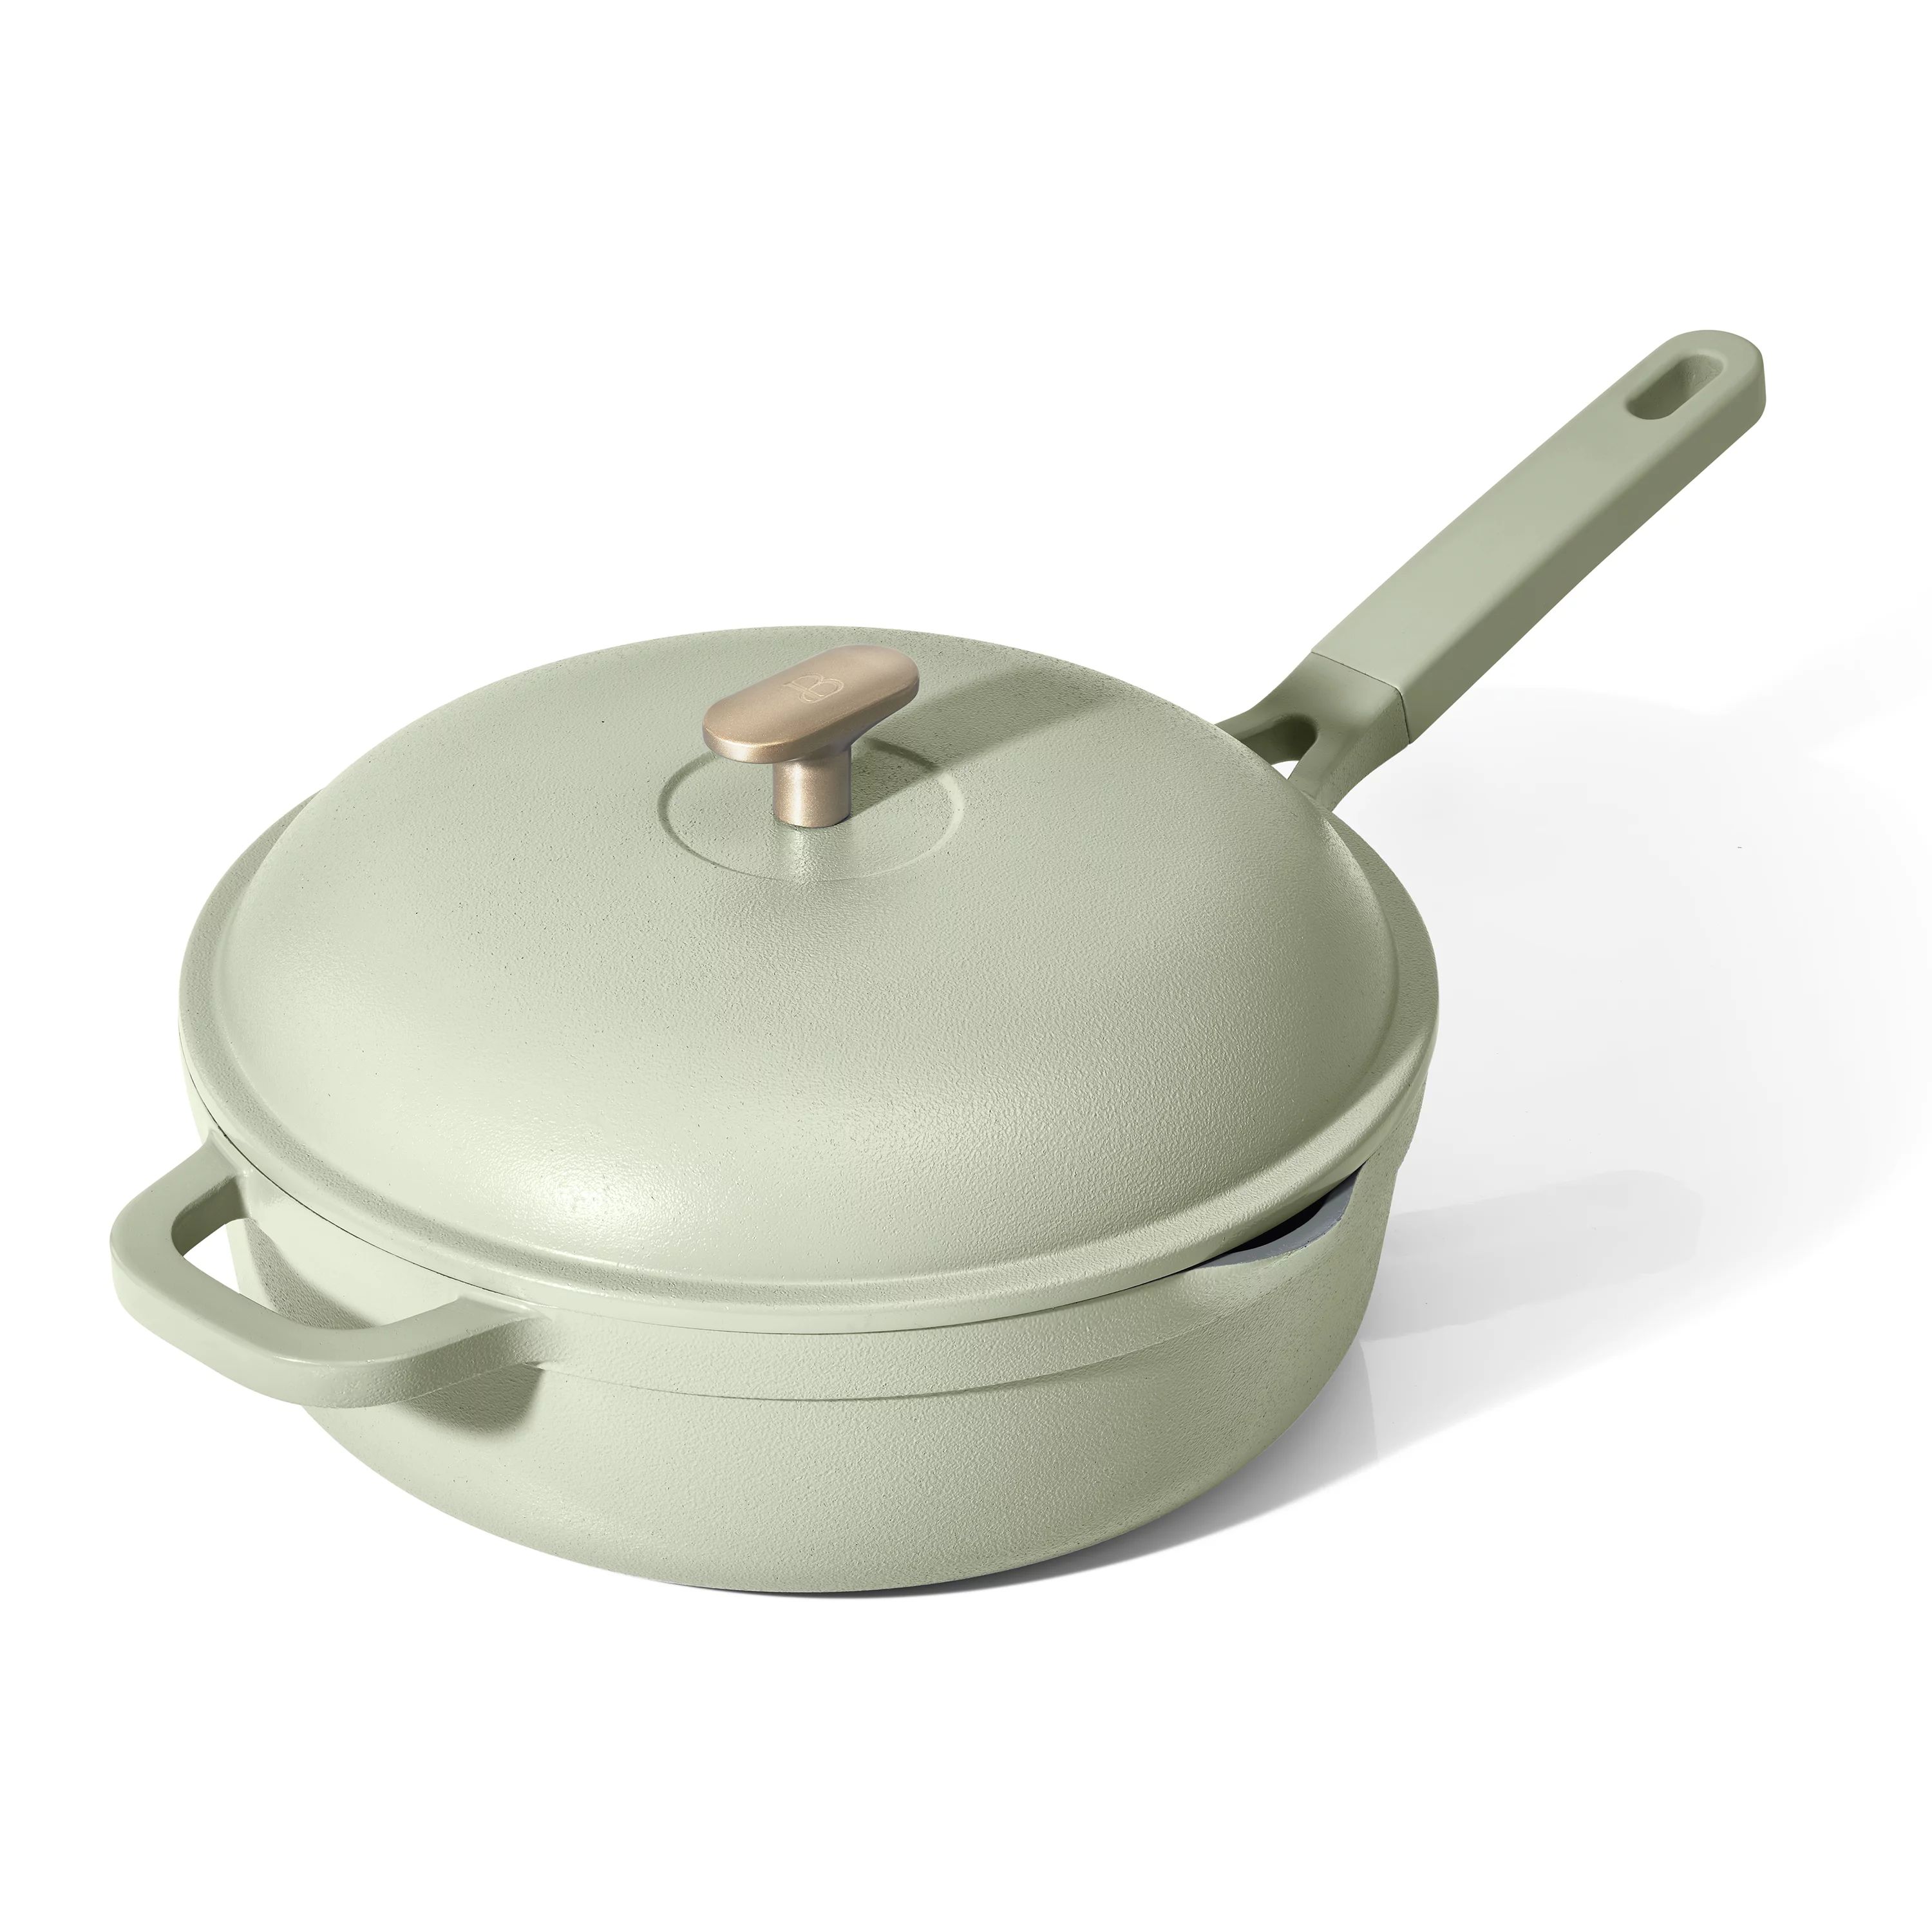 Beautiful 4QT Hero Pan with Steam Insert, Sage Green by Drew Barrymore | Walmart (US)